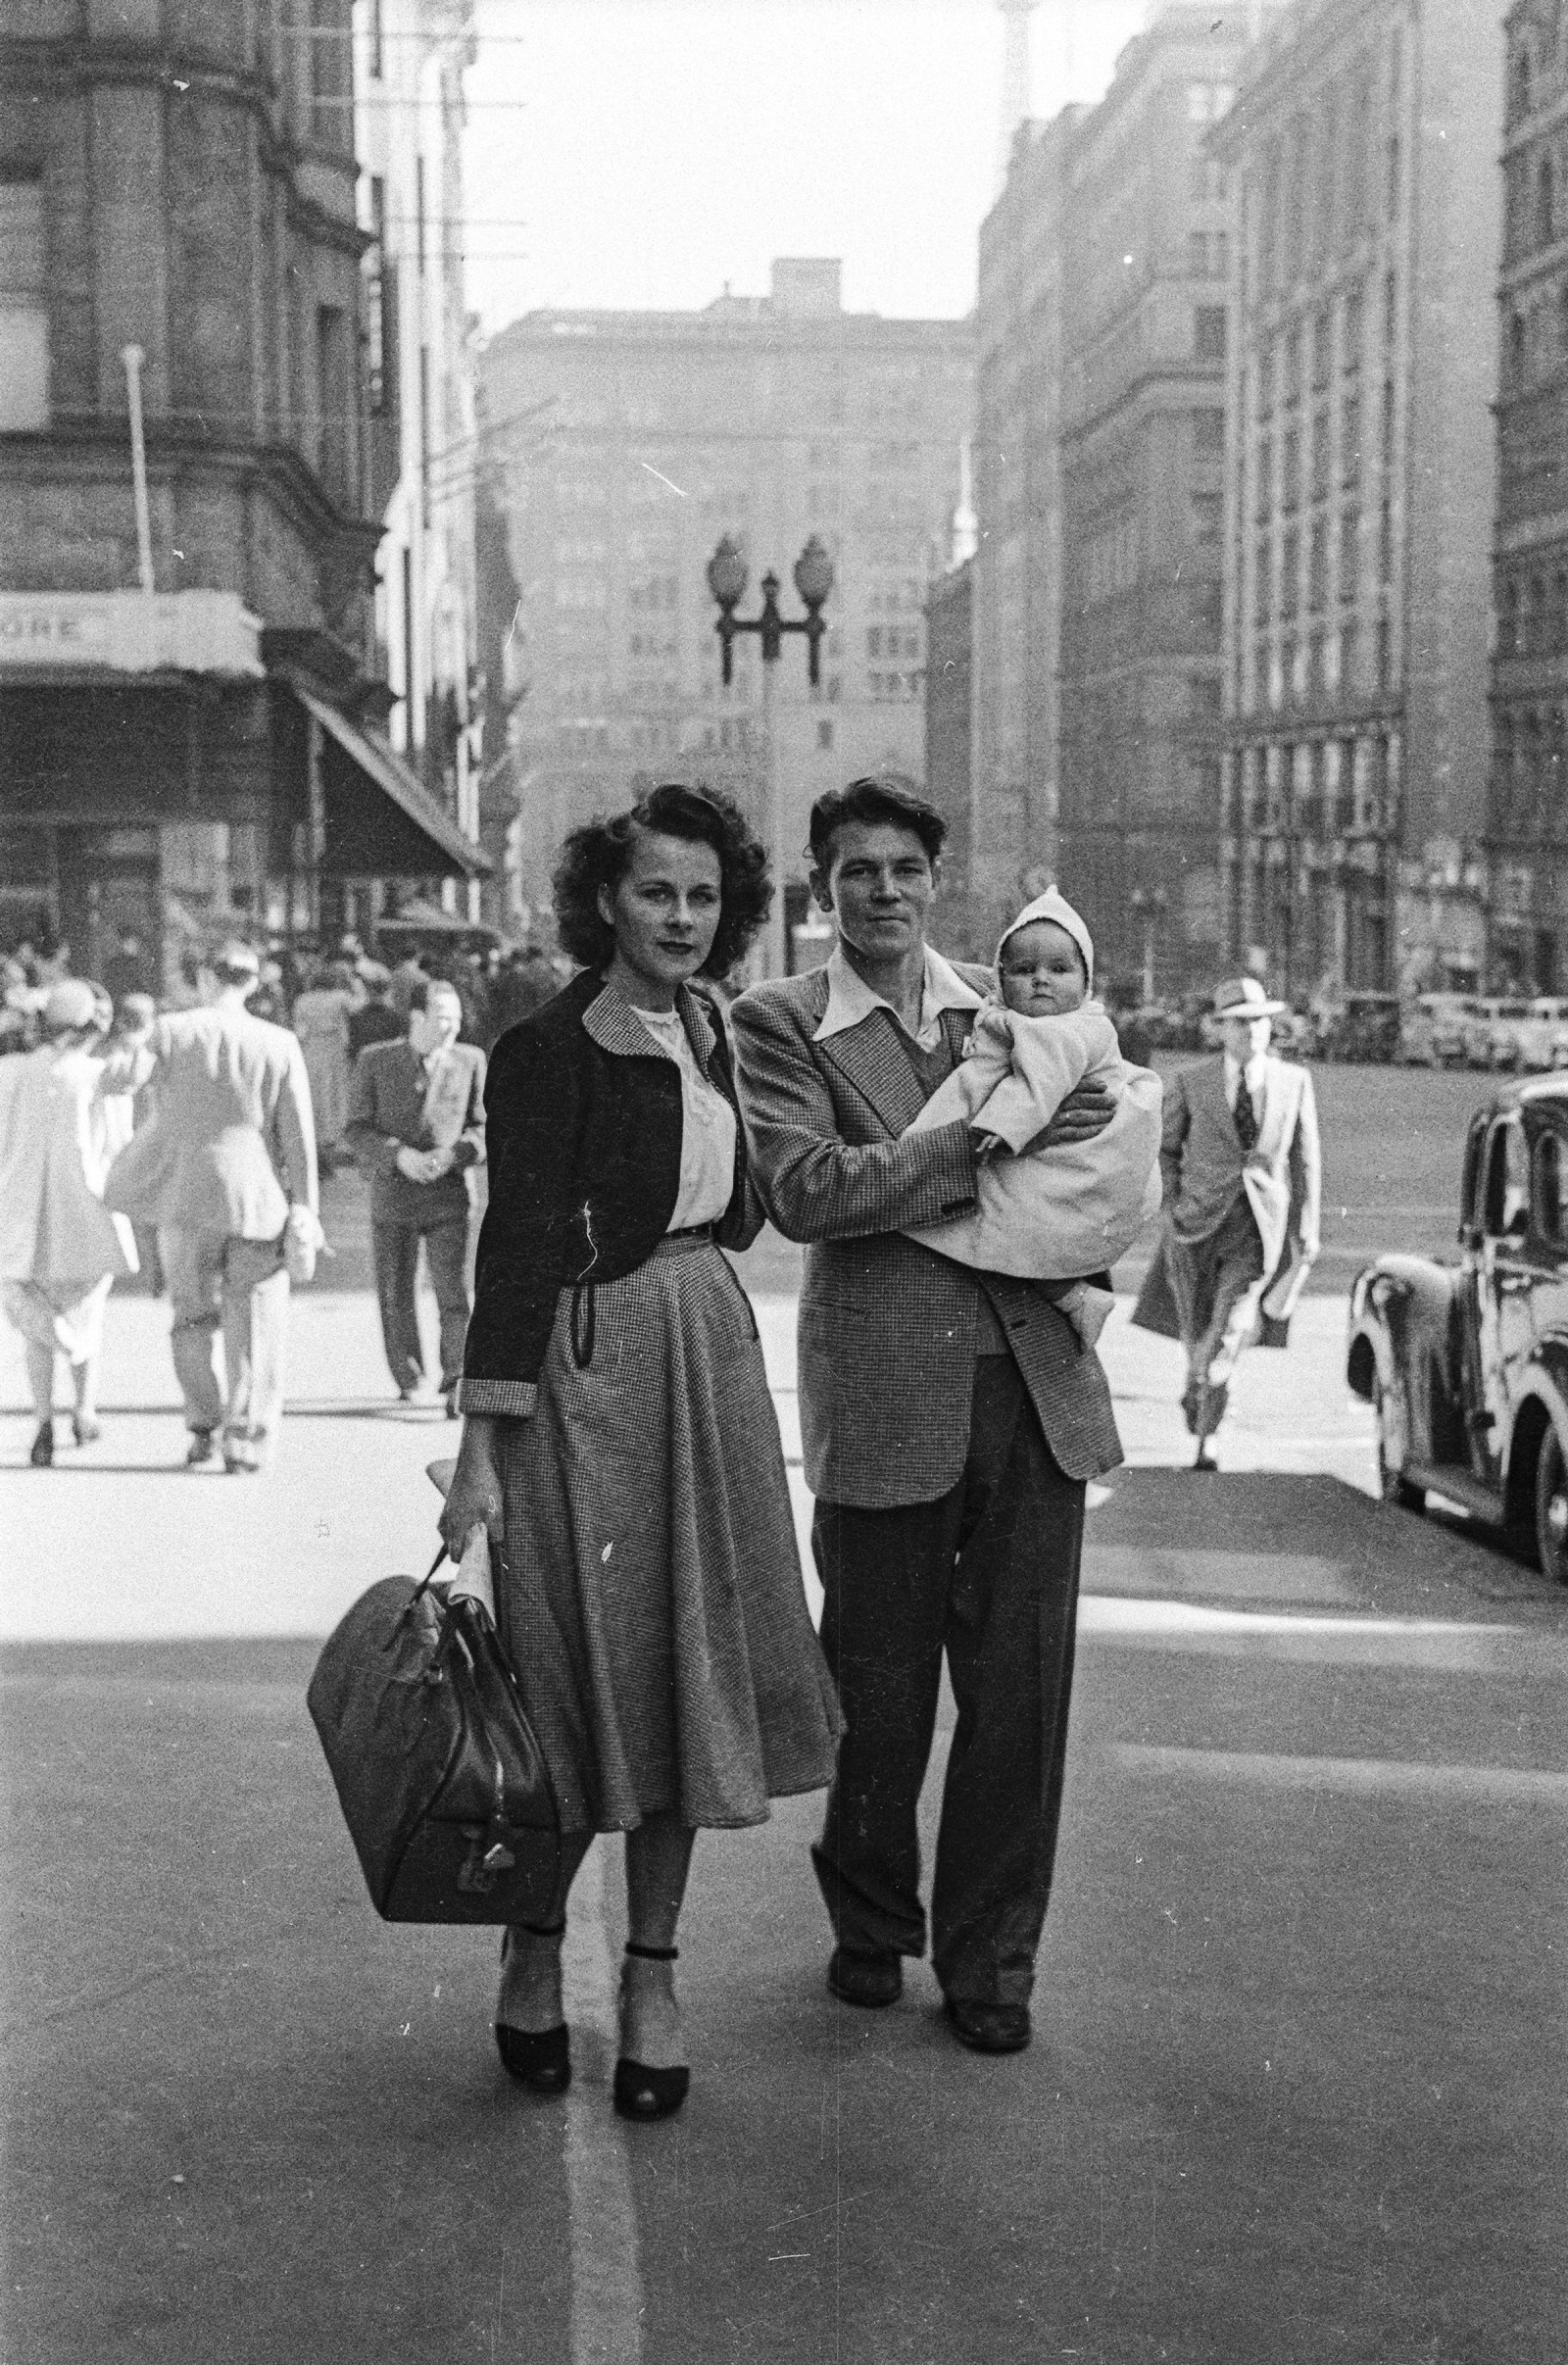 Candid street photograph of pedestrians taken in Martin Place, Sydney, by an unknown Ikon Studio photographer during 1950.